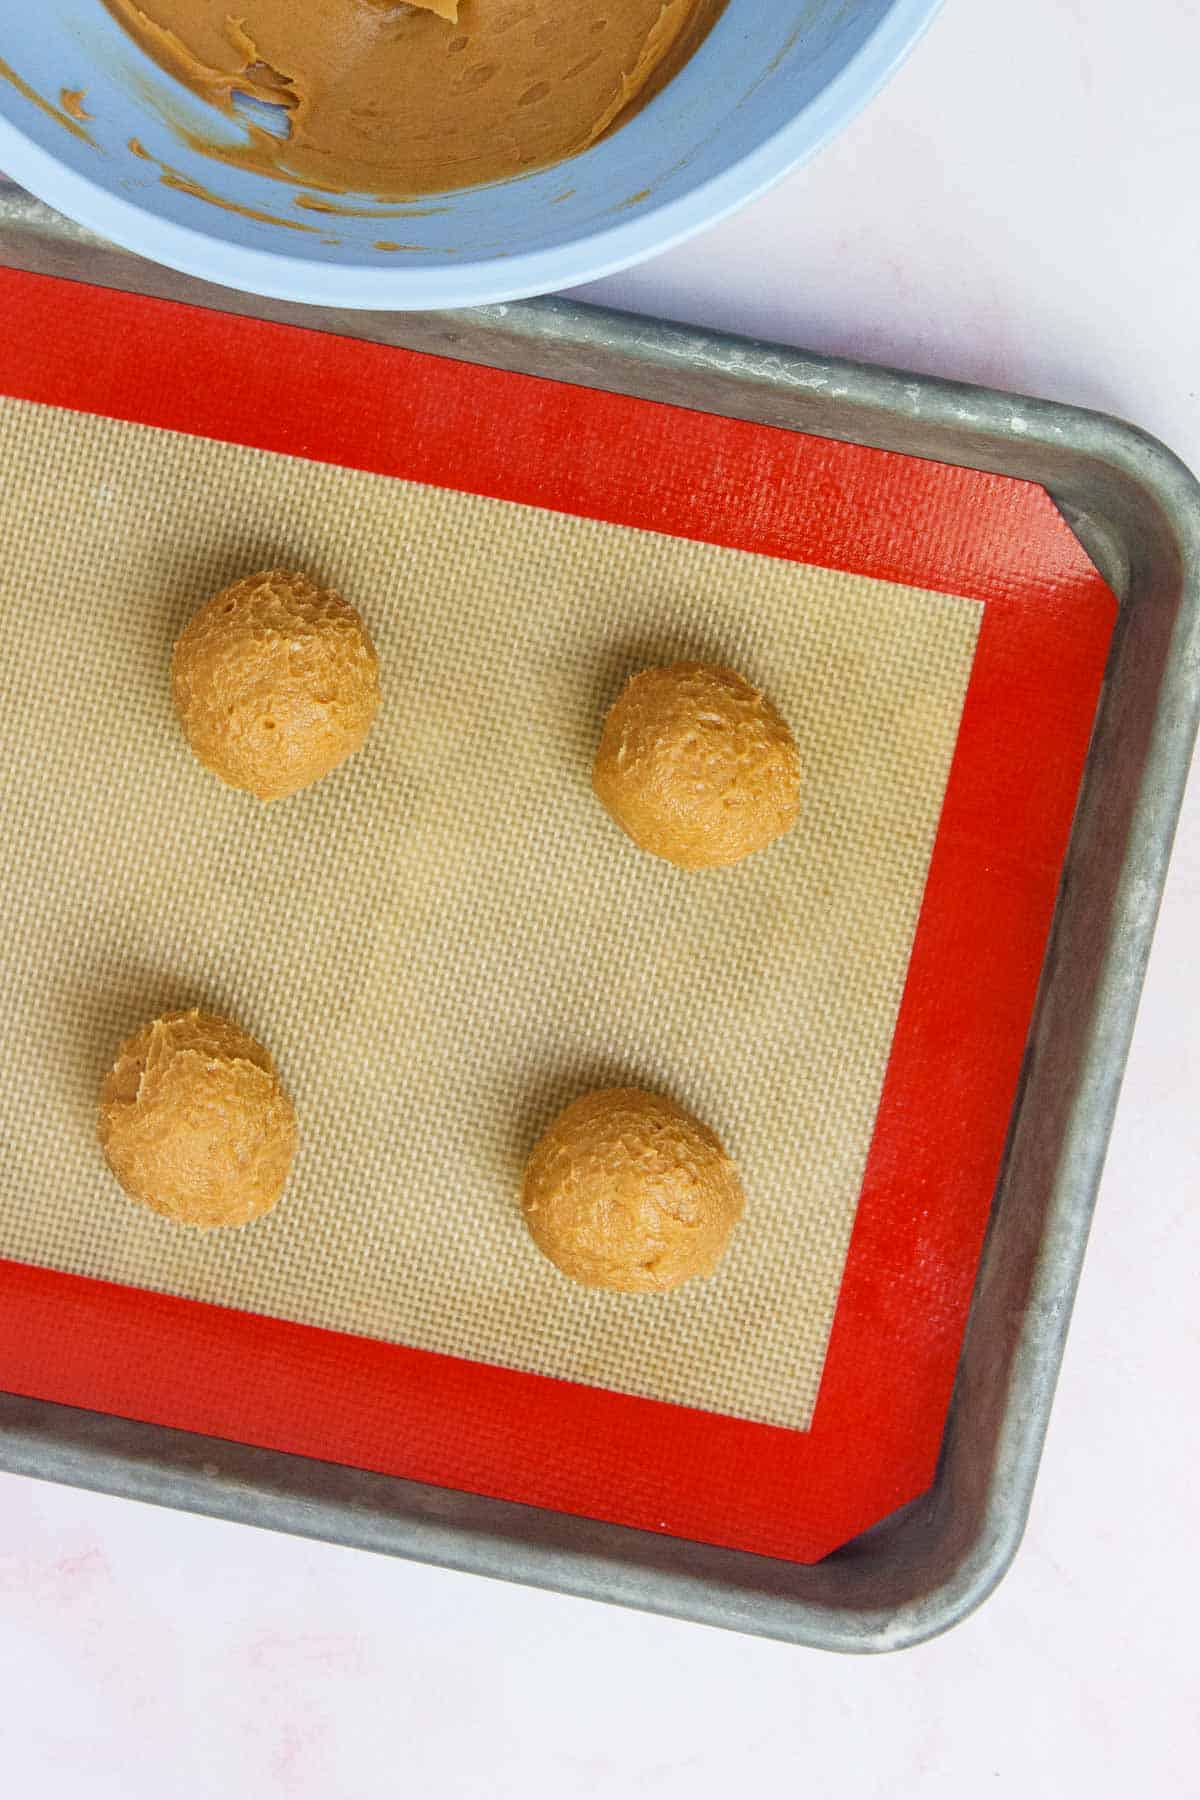 Cookie dough balls spaced evenly on a lined baking sheet.